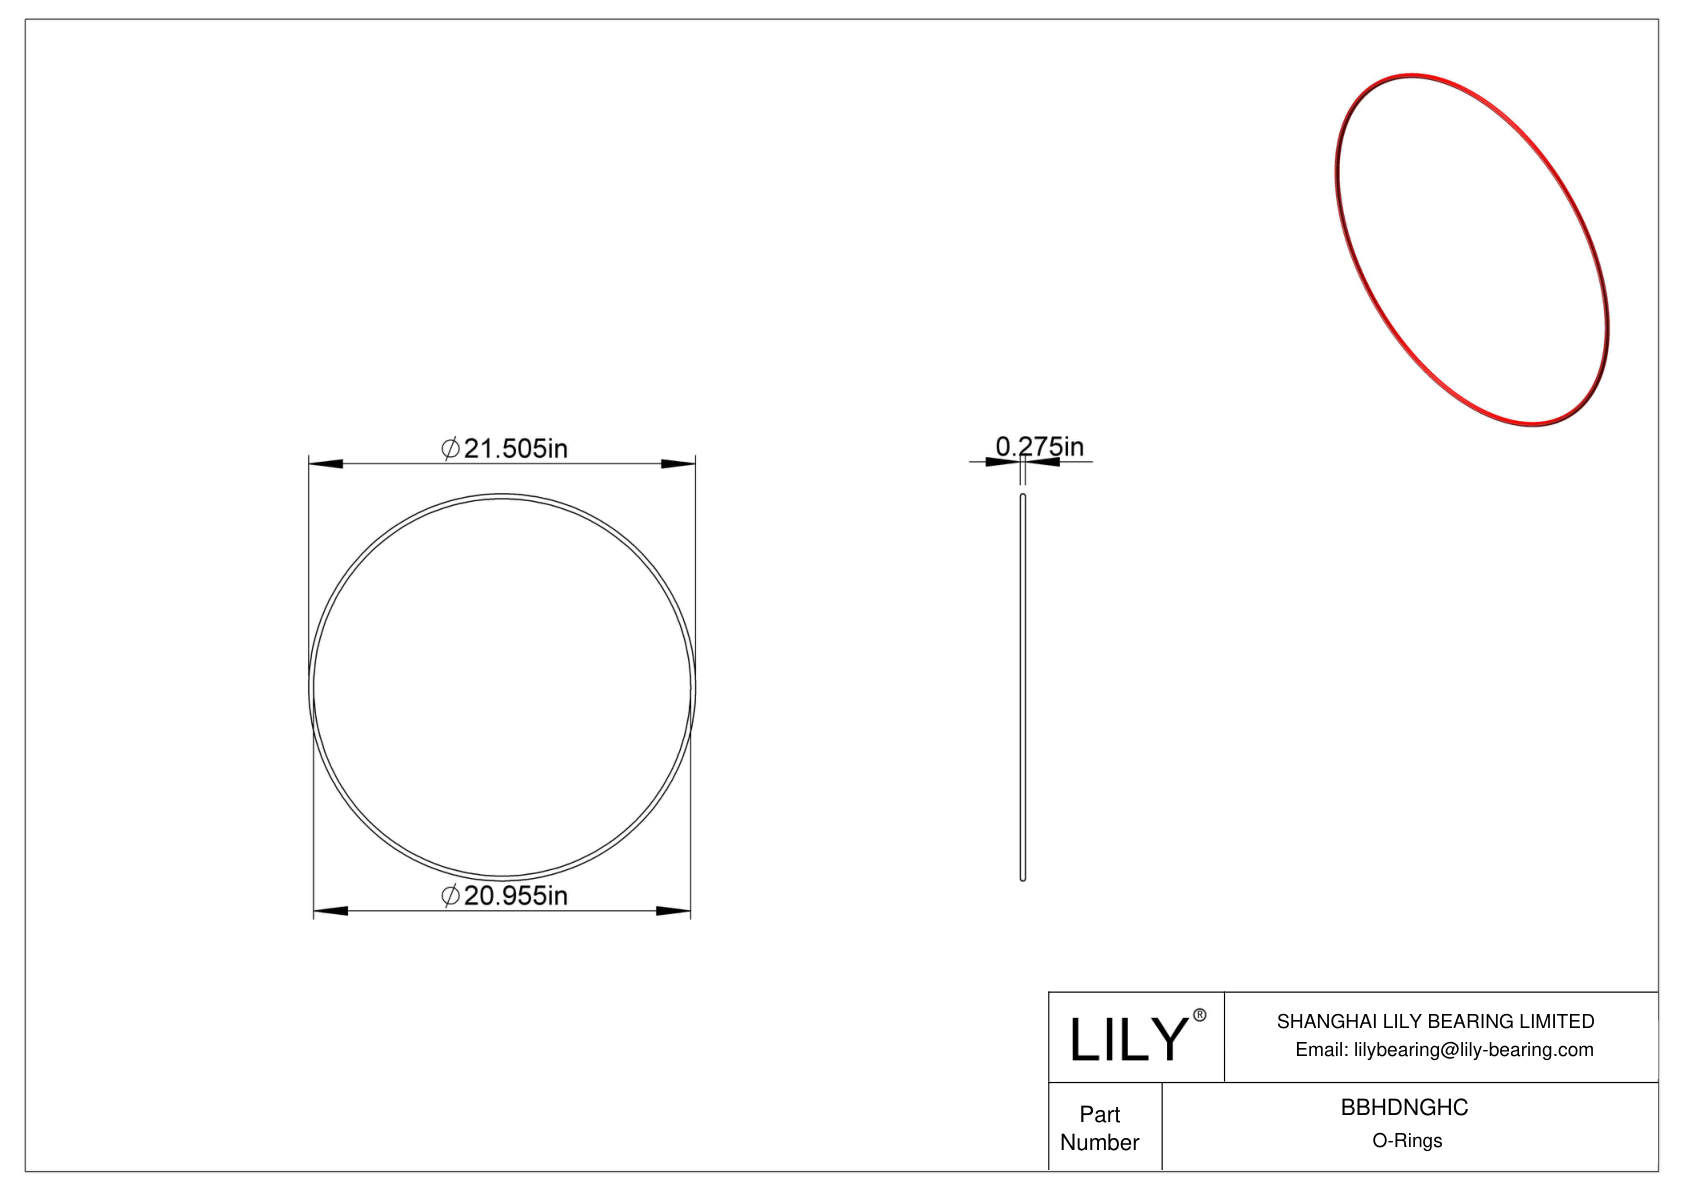 BBHDNGHC High Temperature O-Rings Round cad drawing